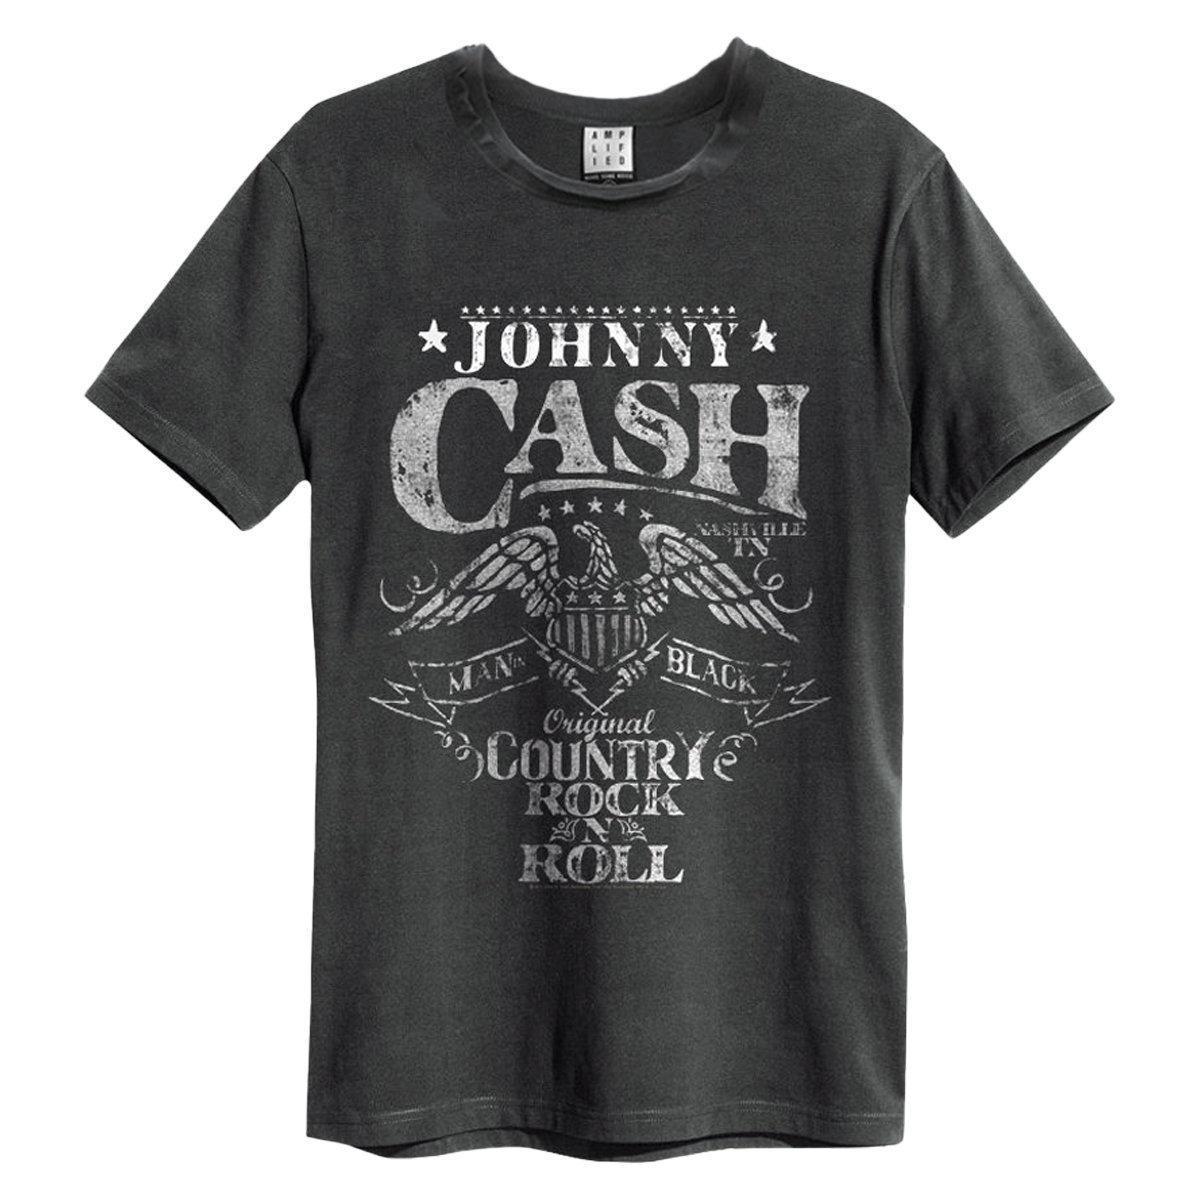 Amplified Unisex Adult Eagle Johnny Cash T-Shirt (Charcoal) (XL)